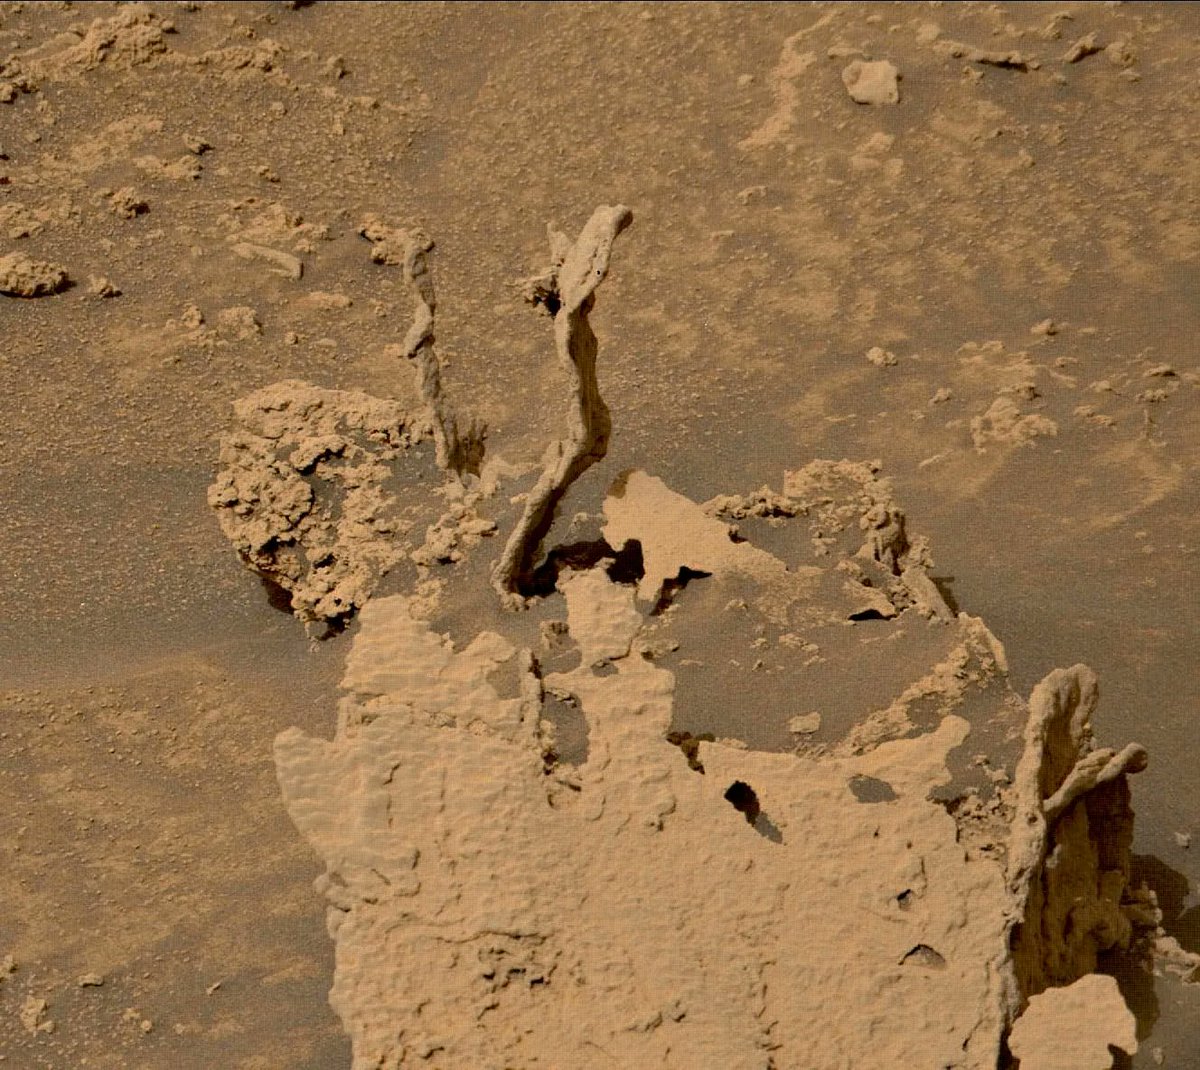 Curiosity Has Found Some Truly Weird-Looking, Twisty Rock Towers on Mars  FTsPAAXWIAEVXLS-1